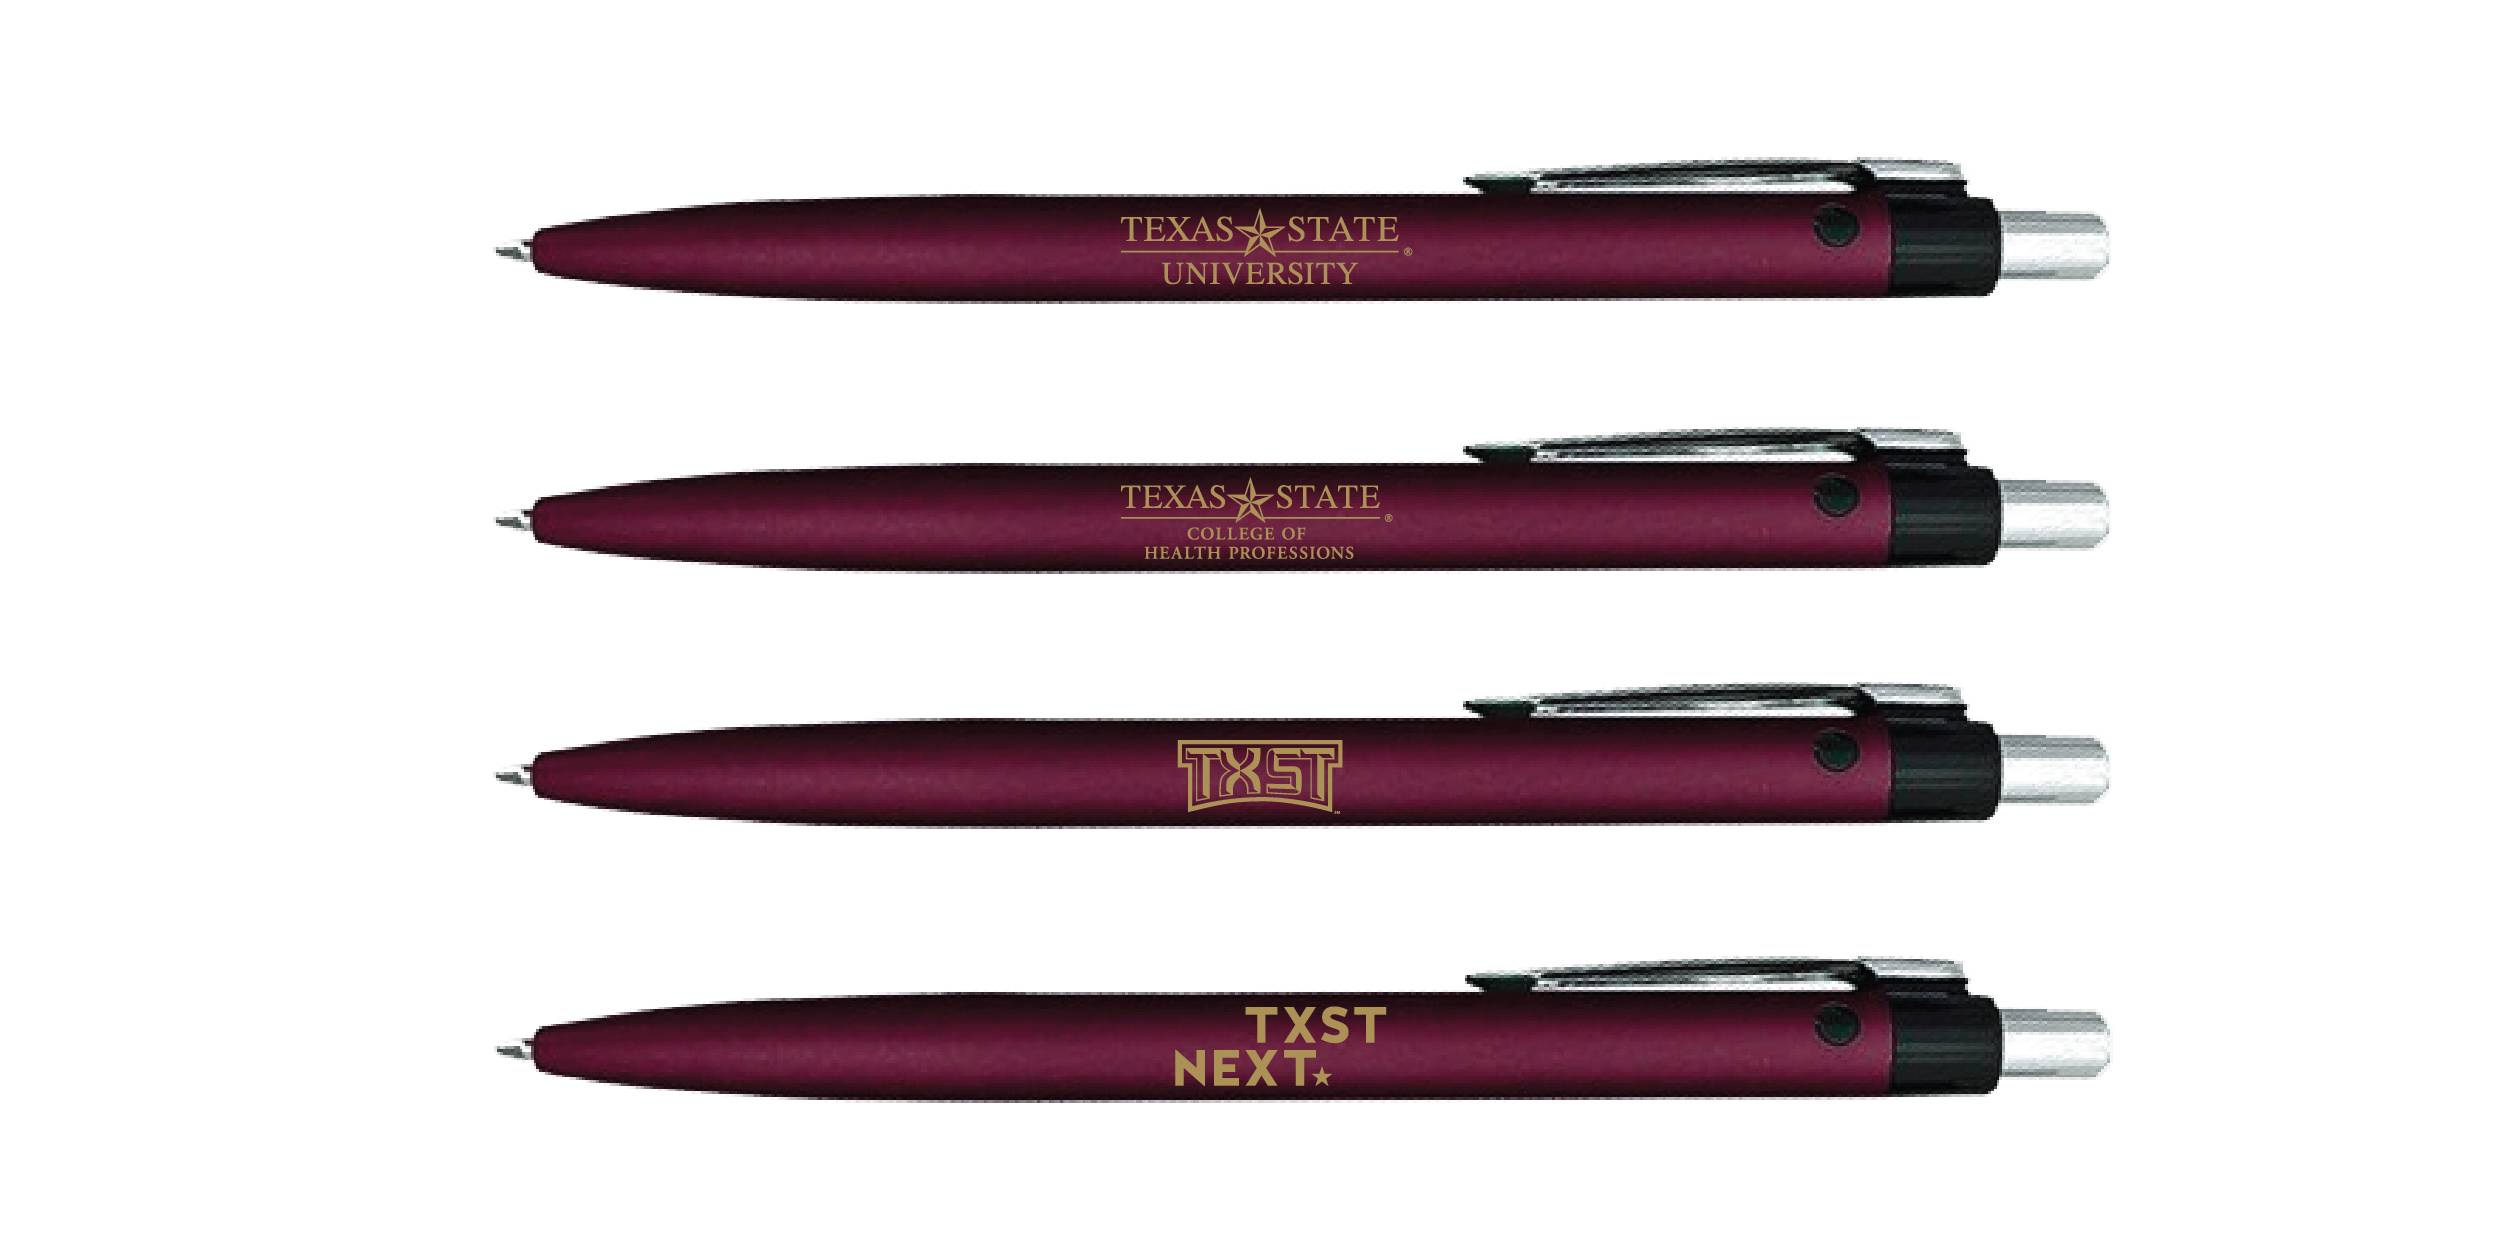 Four pens with the Primary Texas State University logo, an Academic and Administrative logo, the TXST logo, and the TXST NEXT campaign logo.